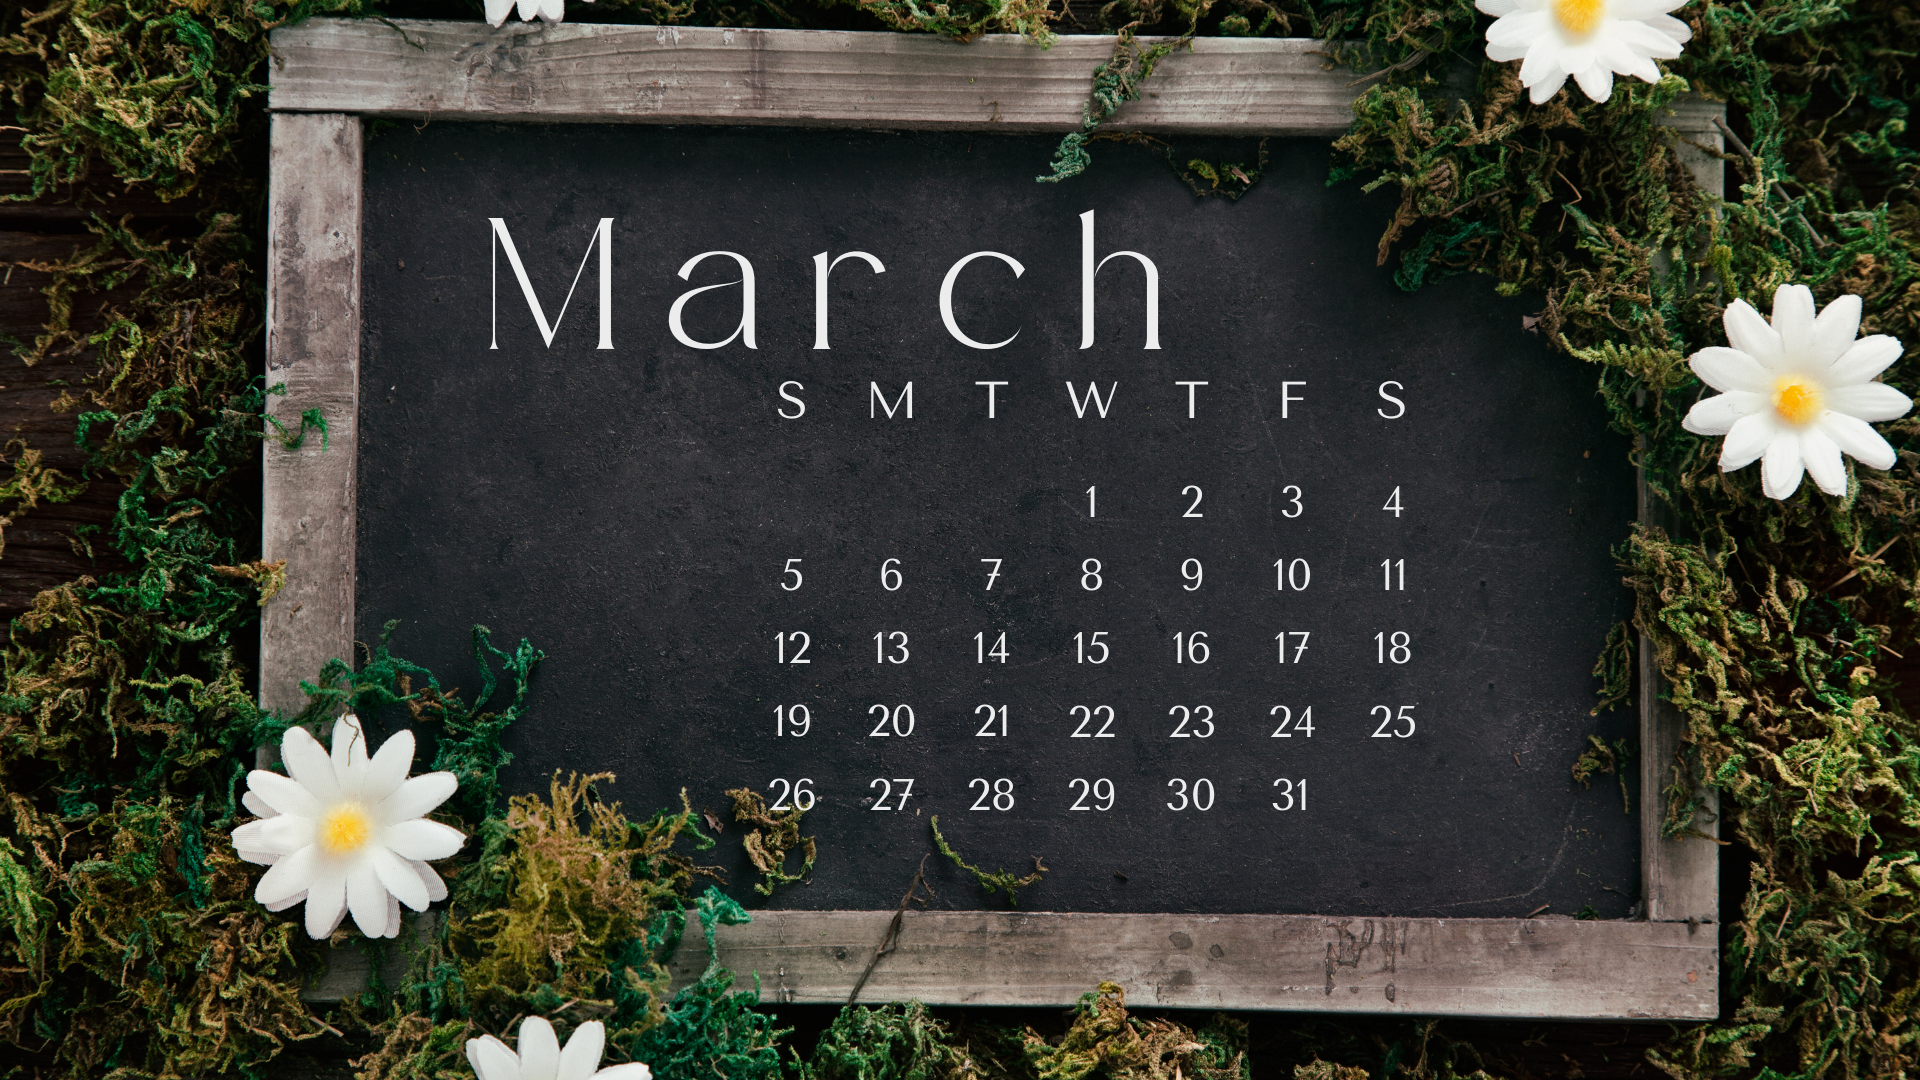 MARCH 2023 desktop calendar backgrounds;  Here are your free March backgrounds for computers and laptops. Tech freebies for this month!